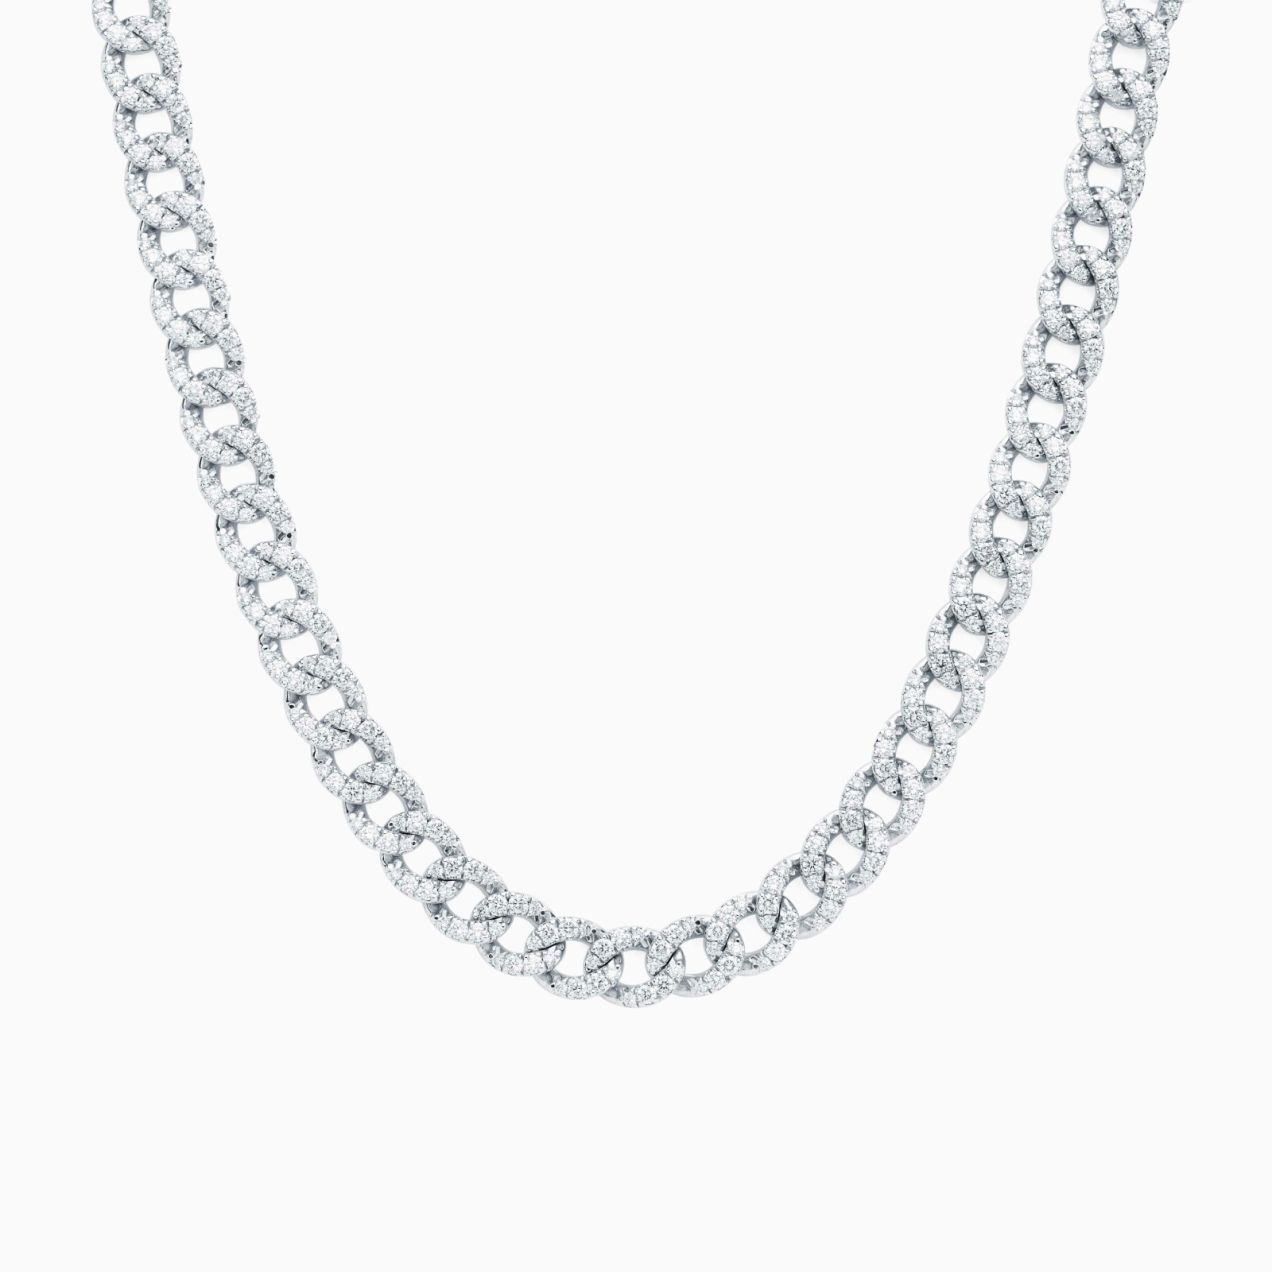 White gold link necklace with diamonds